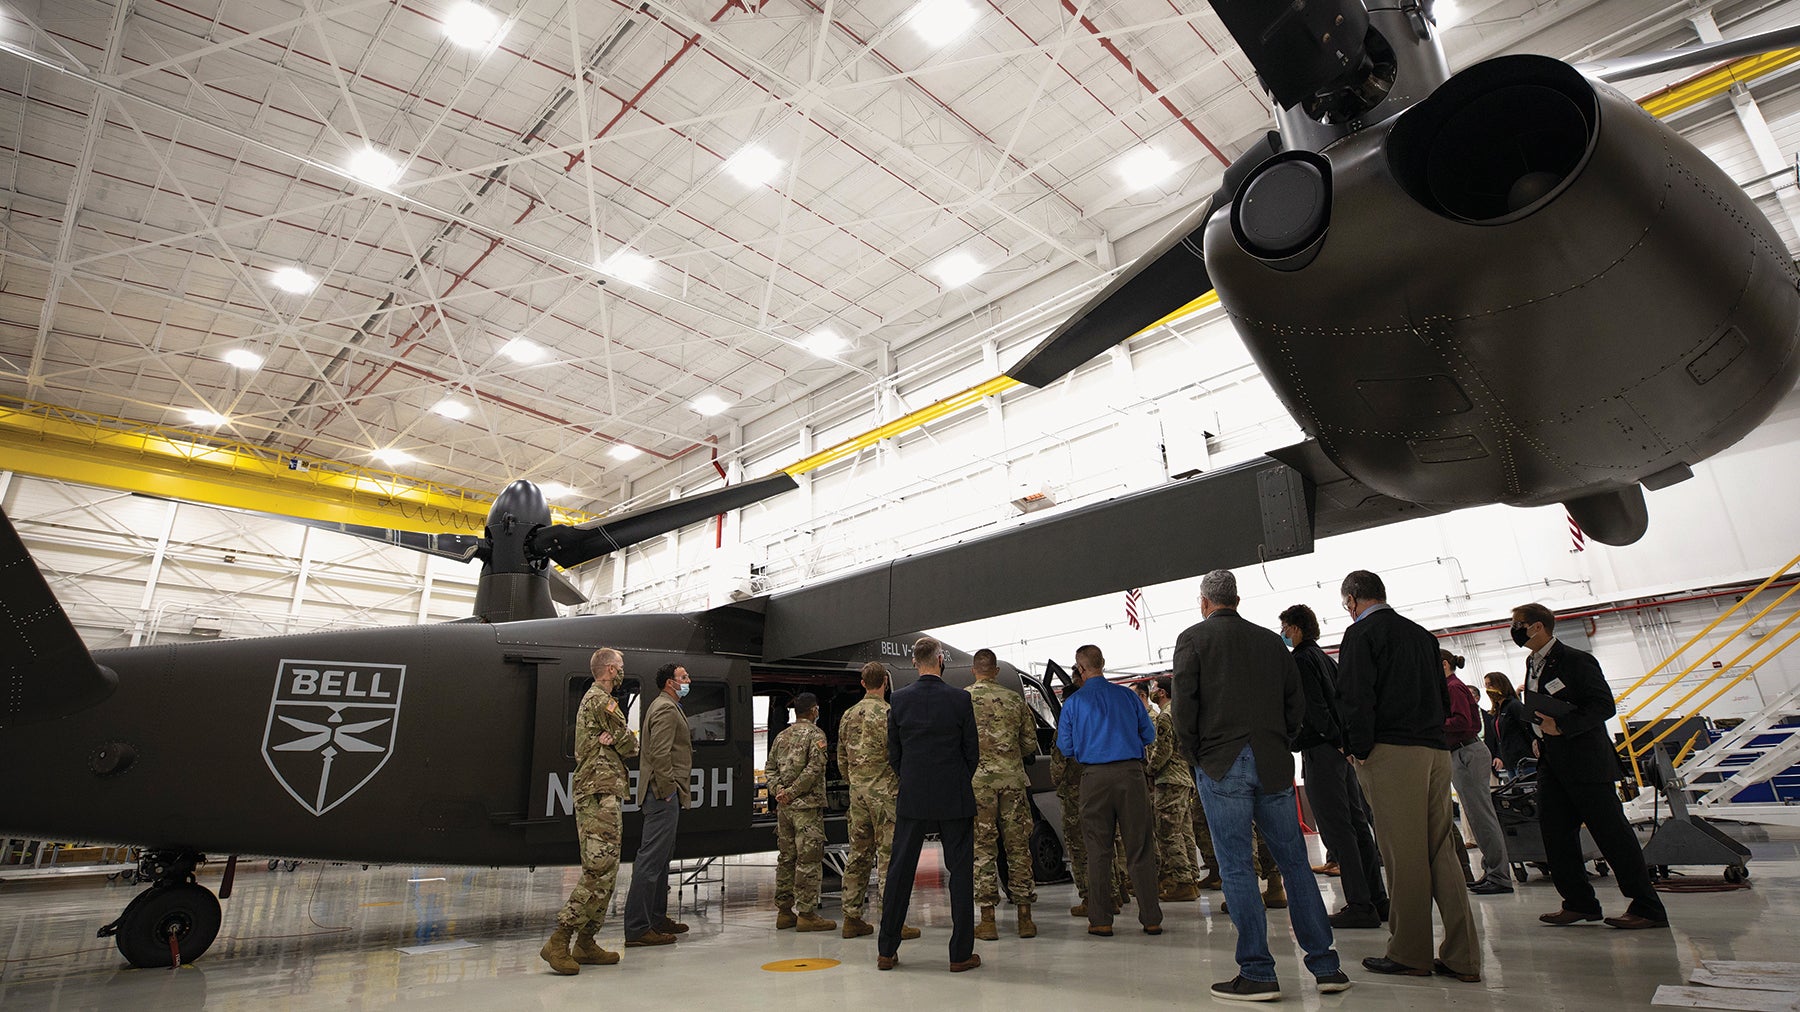 Soldiers from the 3rd Brigade Combat Team, 101st Airborne Division (Air Assault), evaluate the cabin of a Bell V-280 Valor aircraft to provide the company with soldier feedback. (Credit: U.S. Army/Luke Allen)